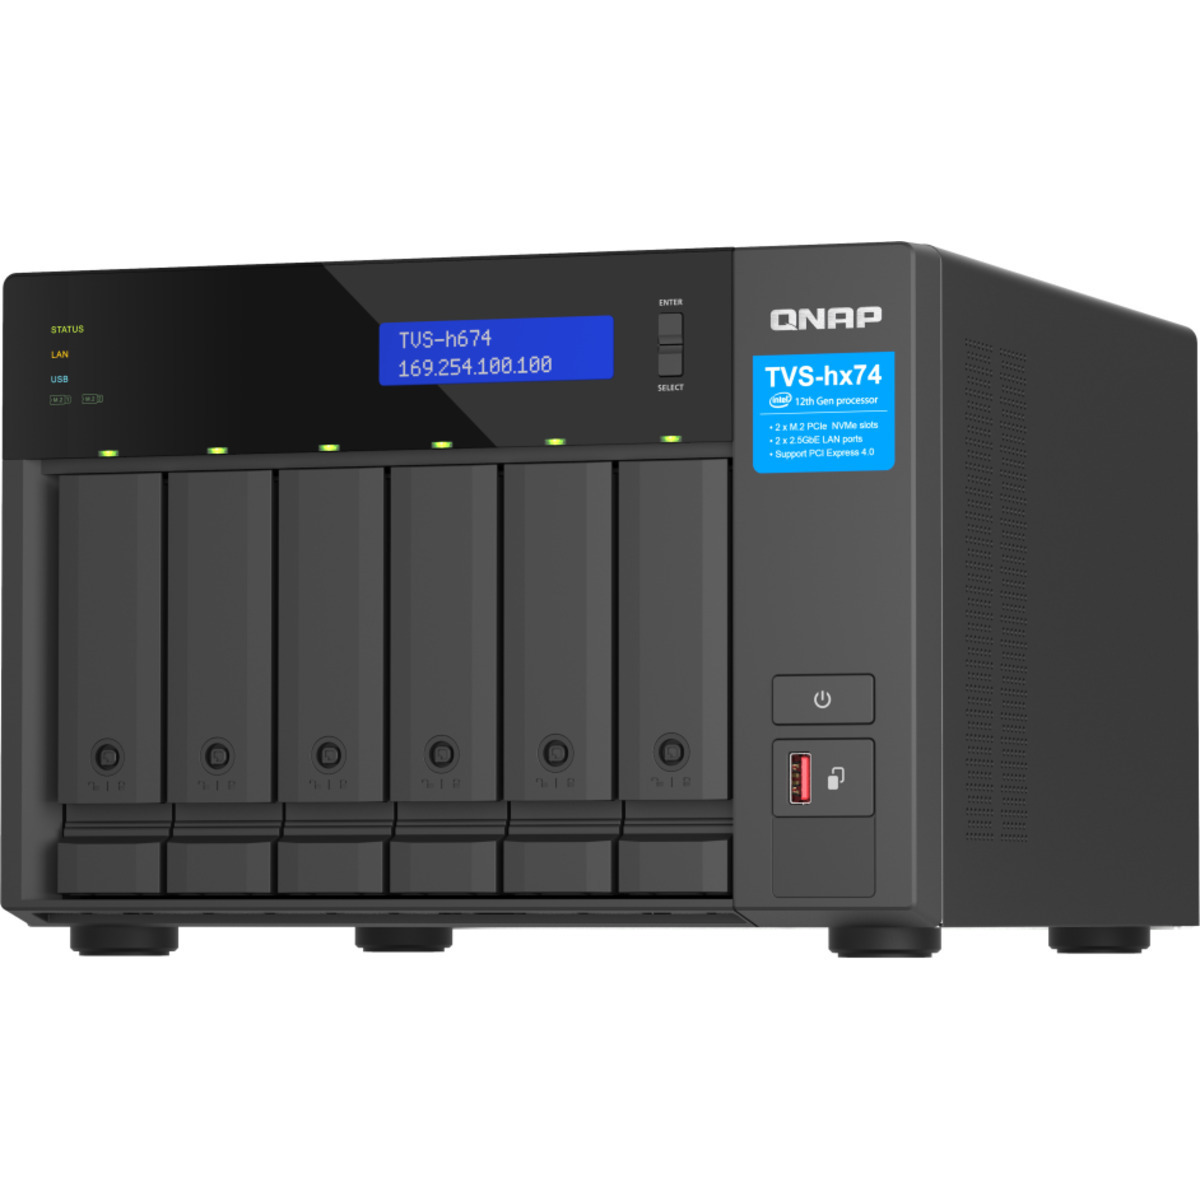 buy $3192 QNAP TVS-h674 Core i5 12tb Desktop NAS - Network Attached Storage Device 6x2000gb Seagate IronWolf Pro ST2000NT001 3.5 7200rpm SATA 6Gb/s HDD NAS Class Drives Installed - Burn-In Tested - nas headquarters buy network attached storage server device das new raid-5 free shipping simply usa TVS-h674 Core i5